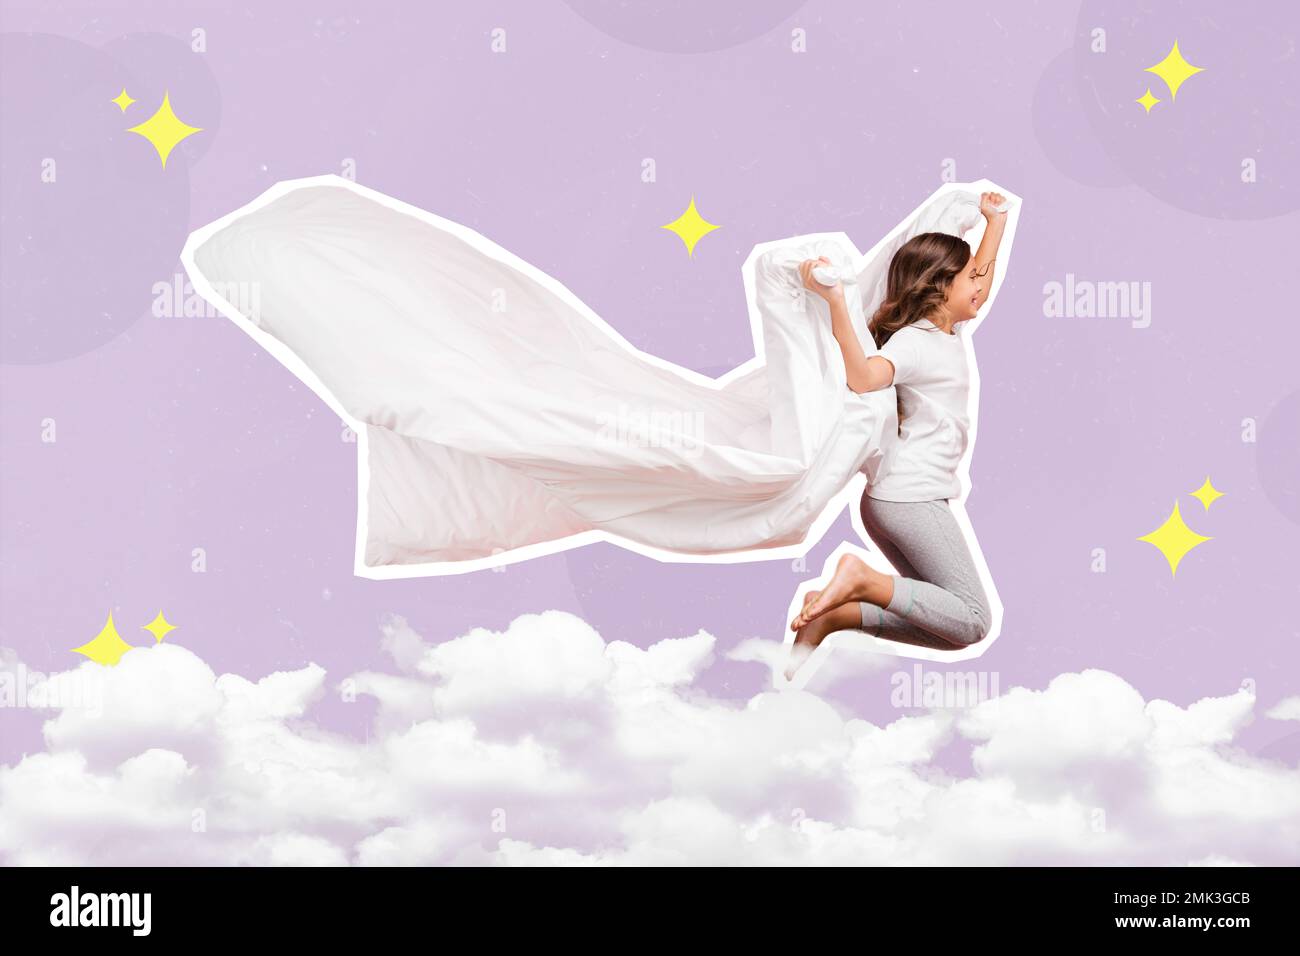 Collage 3d image of pinup pop retro sketch of funny carefree small kid flying blanket isolated painting background Stock Photo